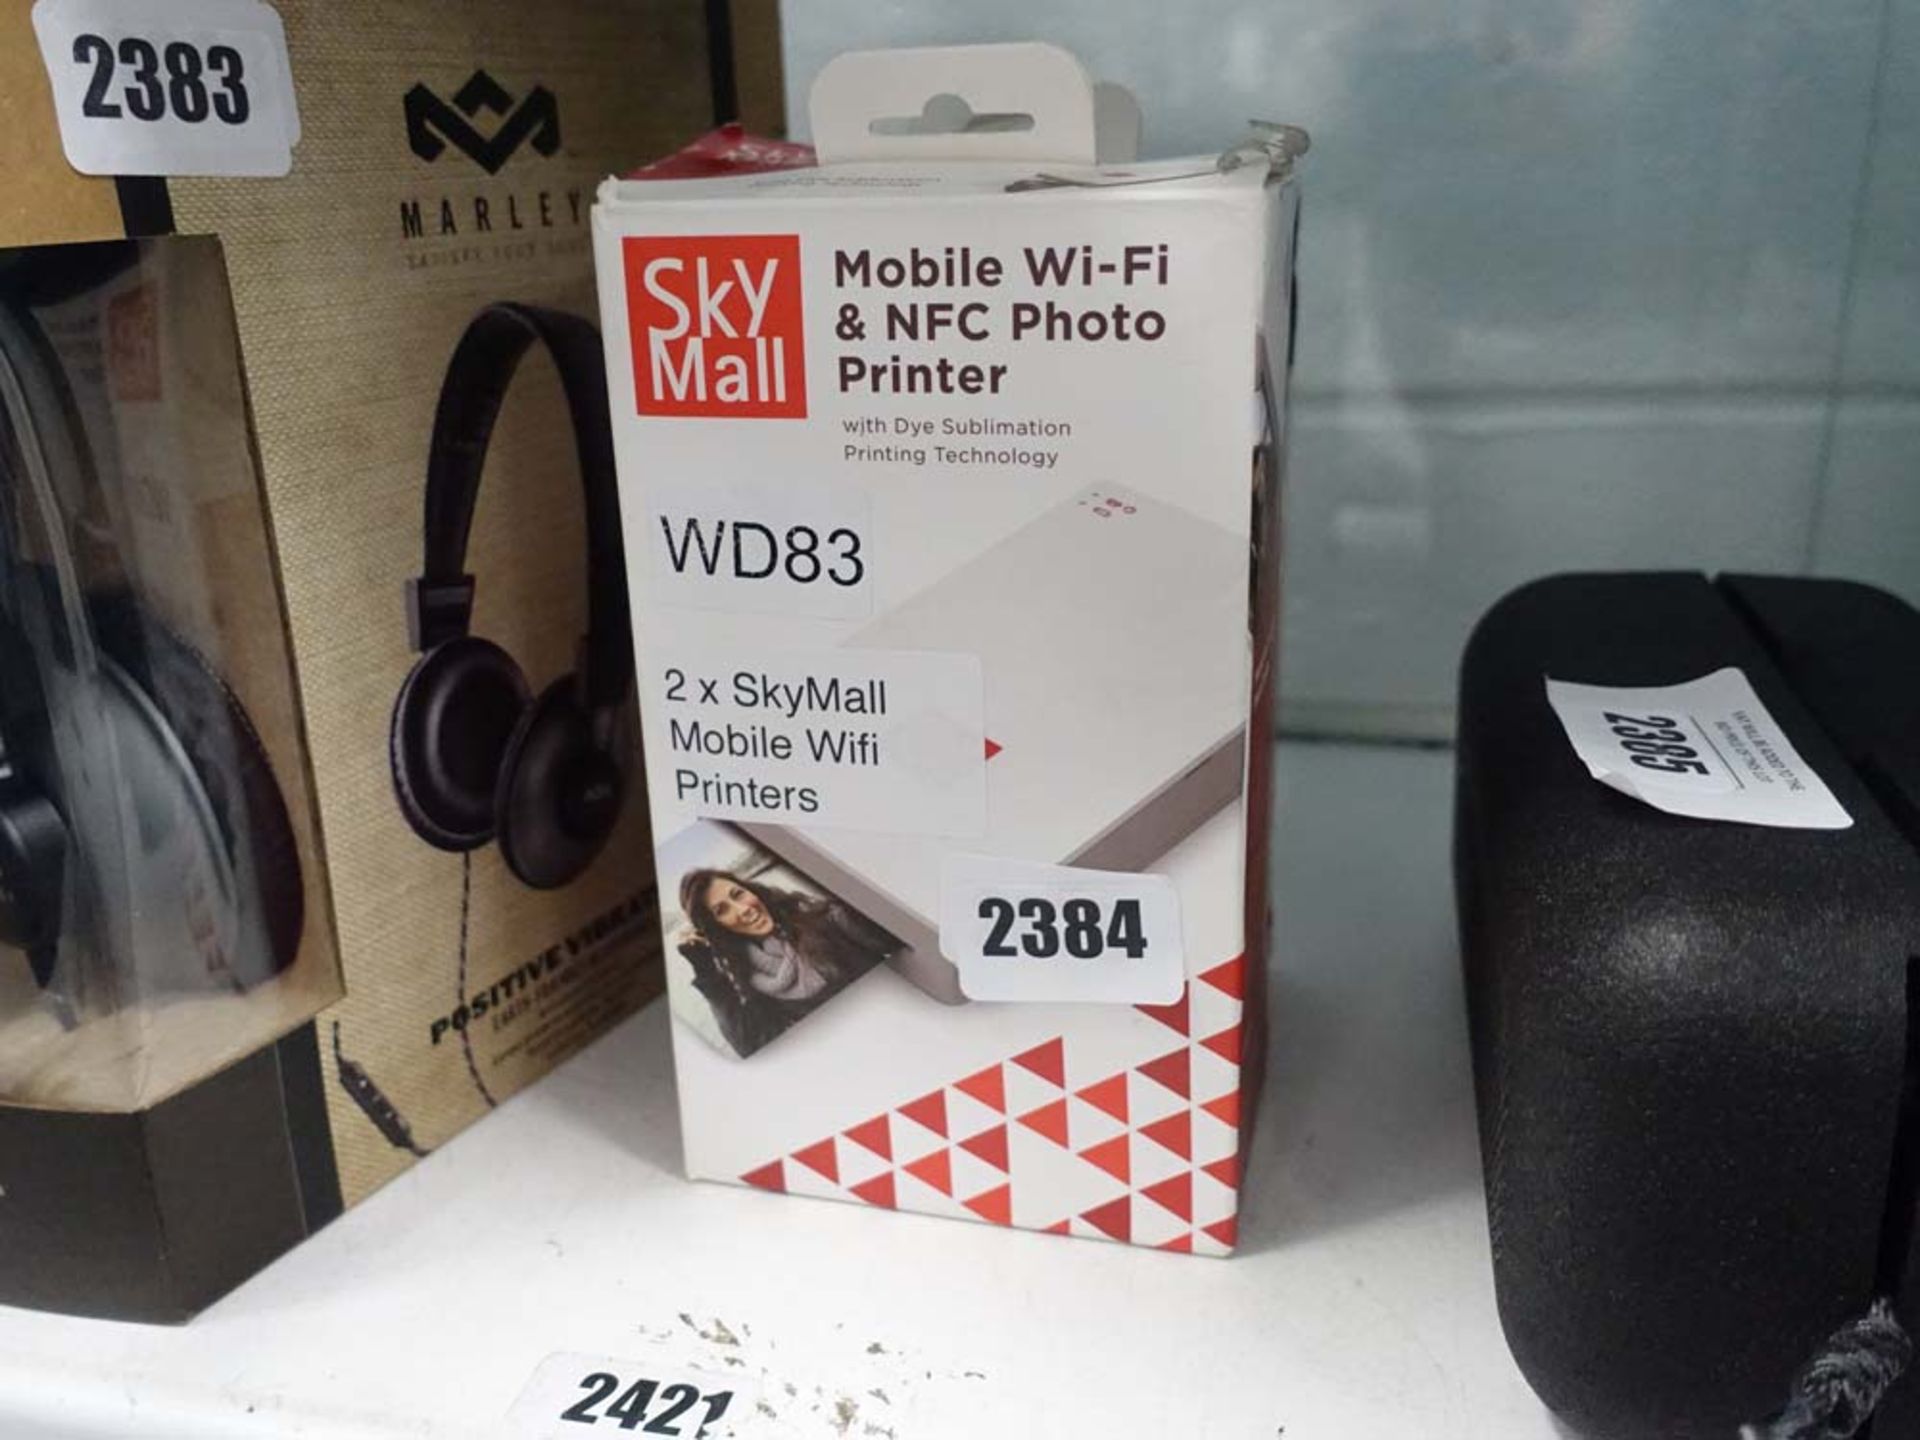 2075 - Skymall mobile wifi printers in boxes